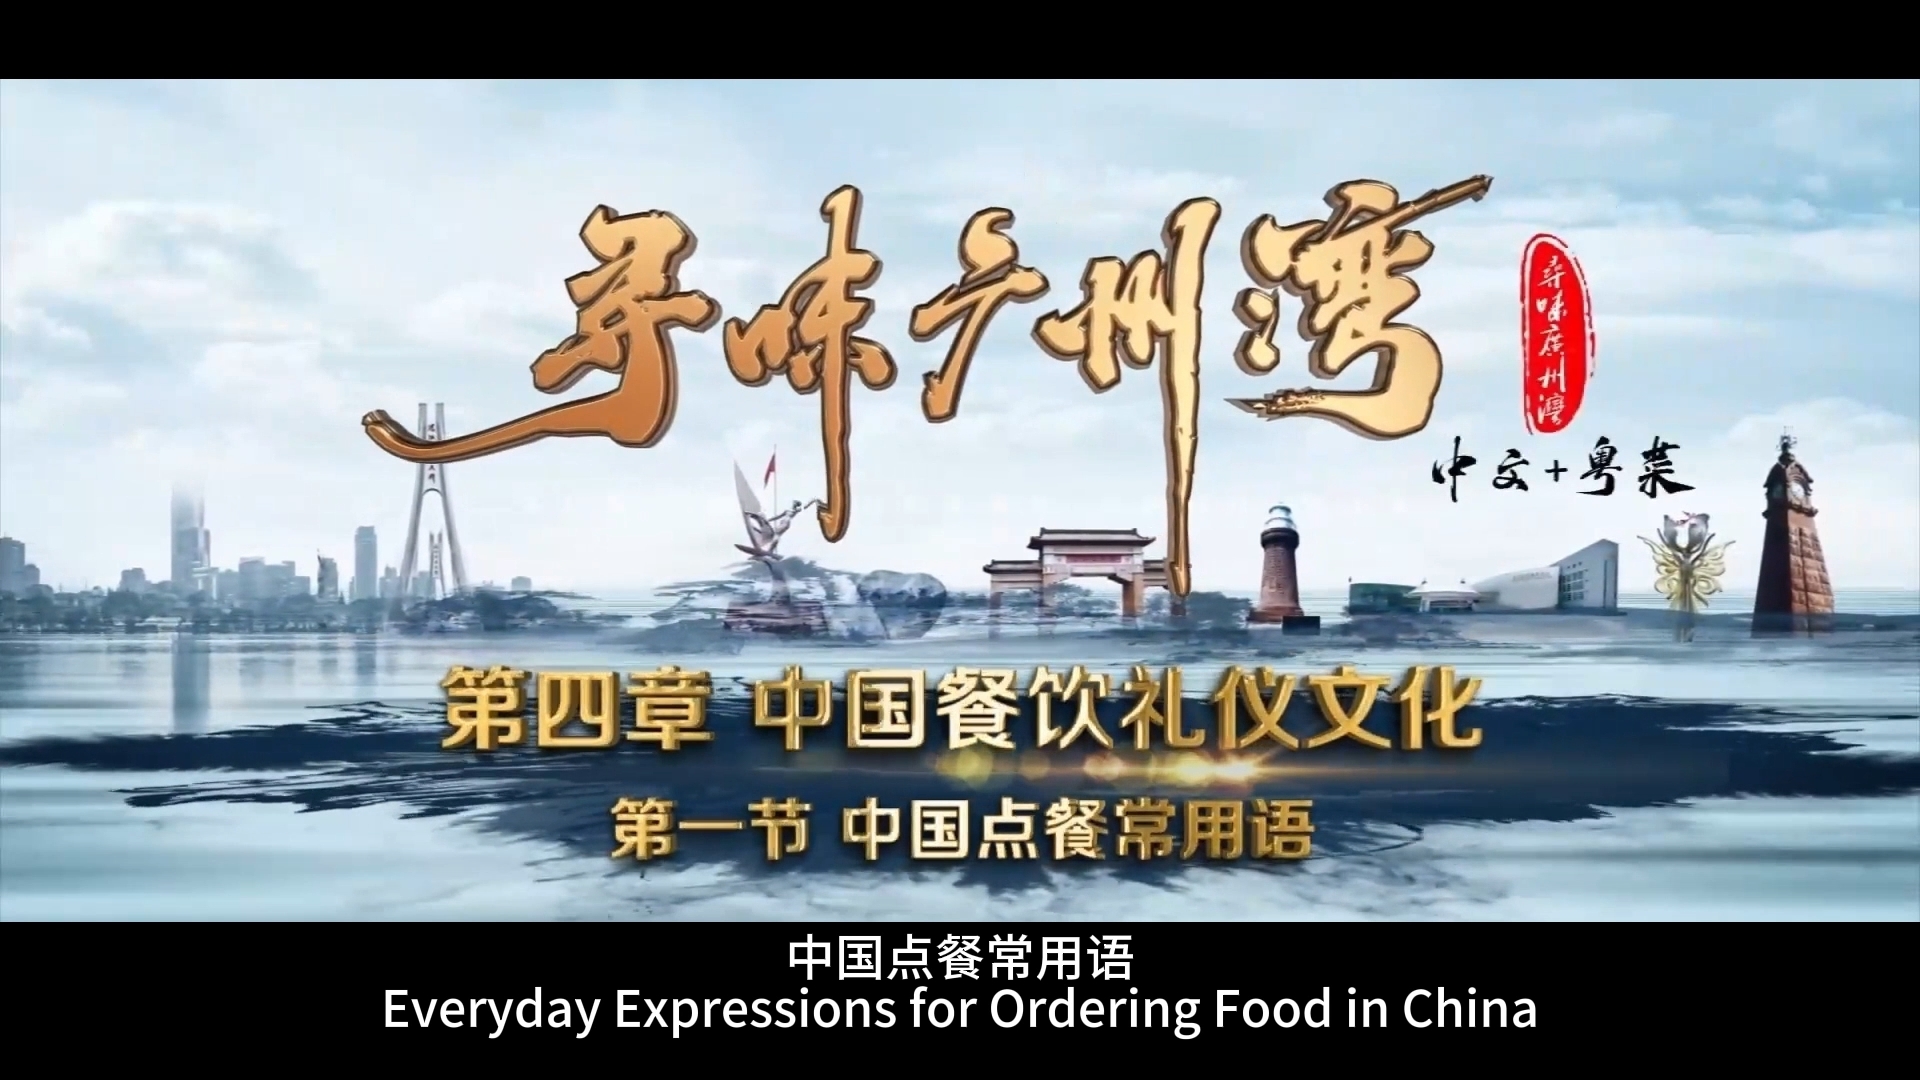 Everyday Expressions for Ordering Food in China